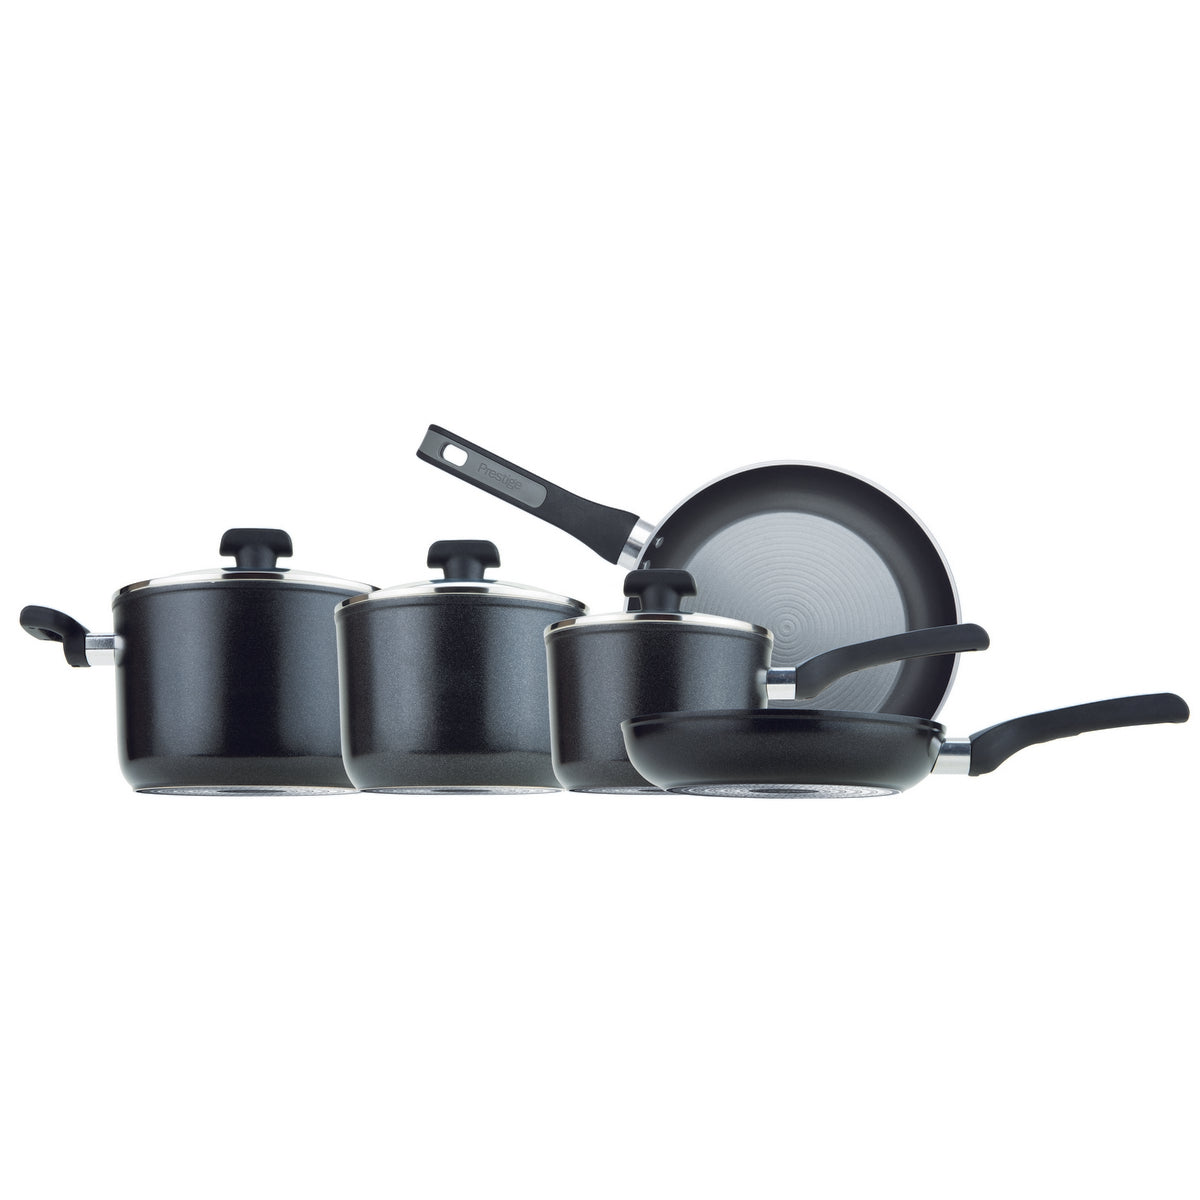 An image of Prestige Dura Forge 5 Piece Pan Set